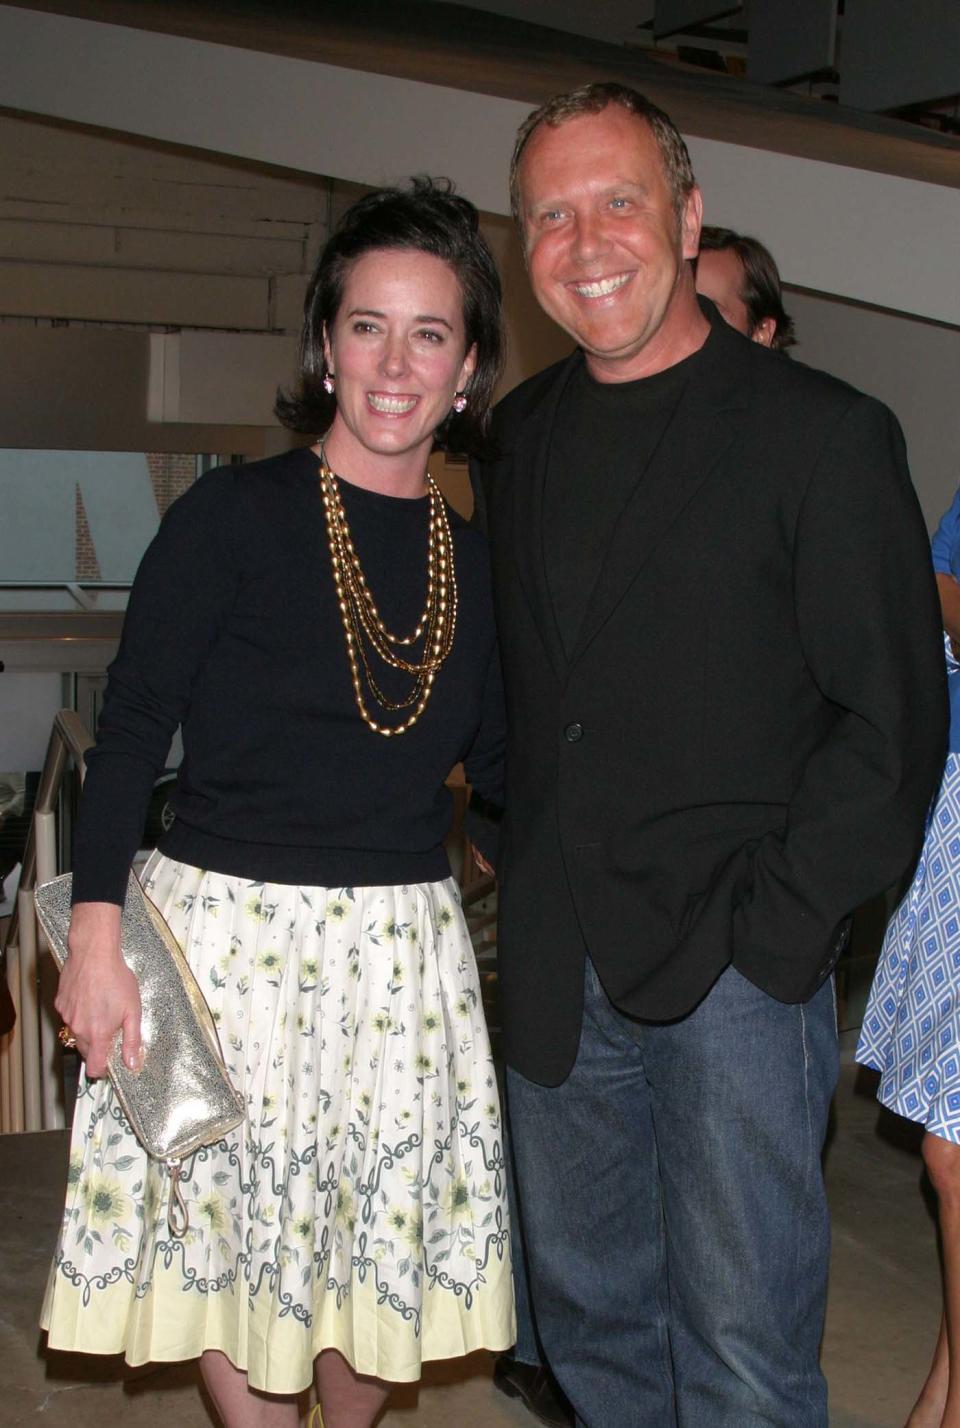 Kate Spade and Michael Kors at the CFDA-hosted preview of “Fashioning Fiction,” at MoMA Queens in New York City in 2004. (Photo: John Calabrese/Penske Media/Rex/Shutterstock)